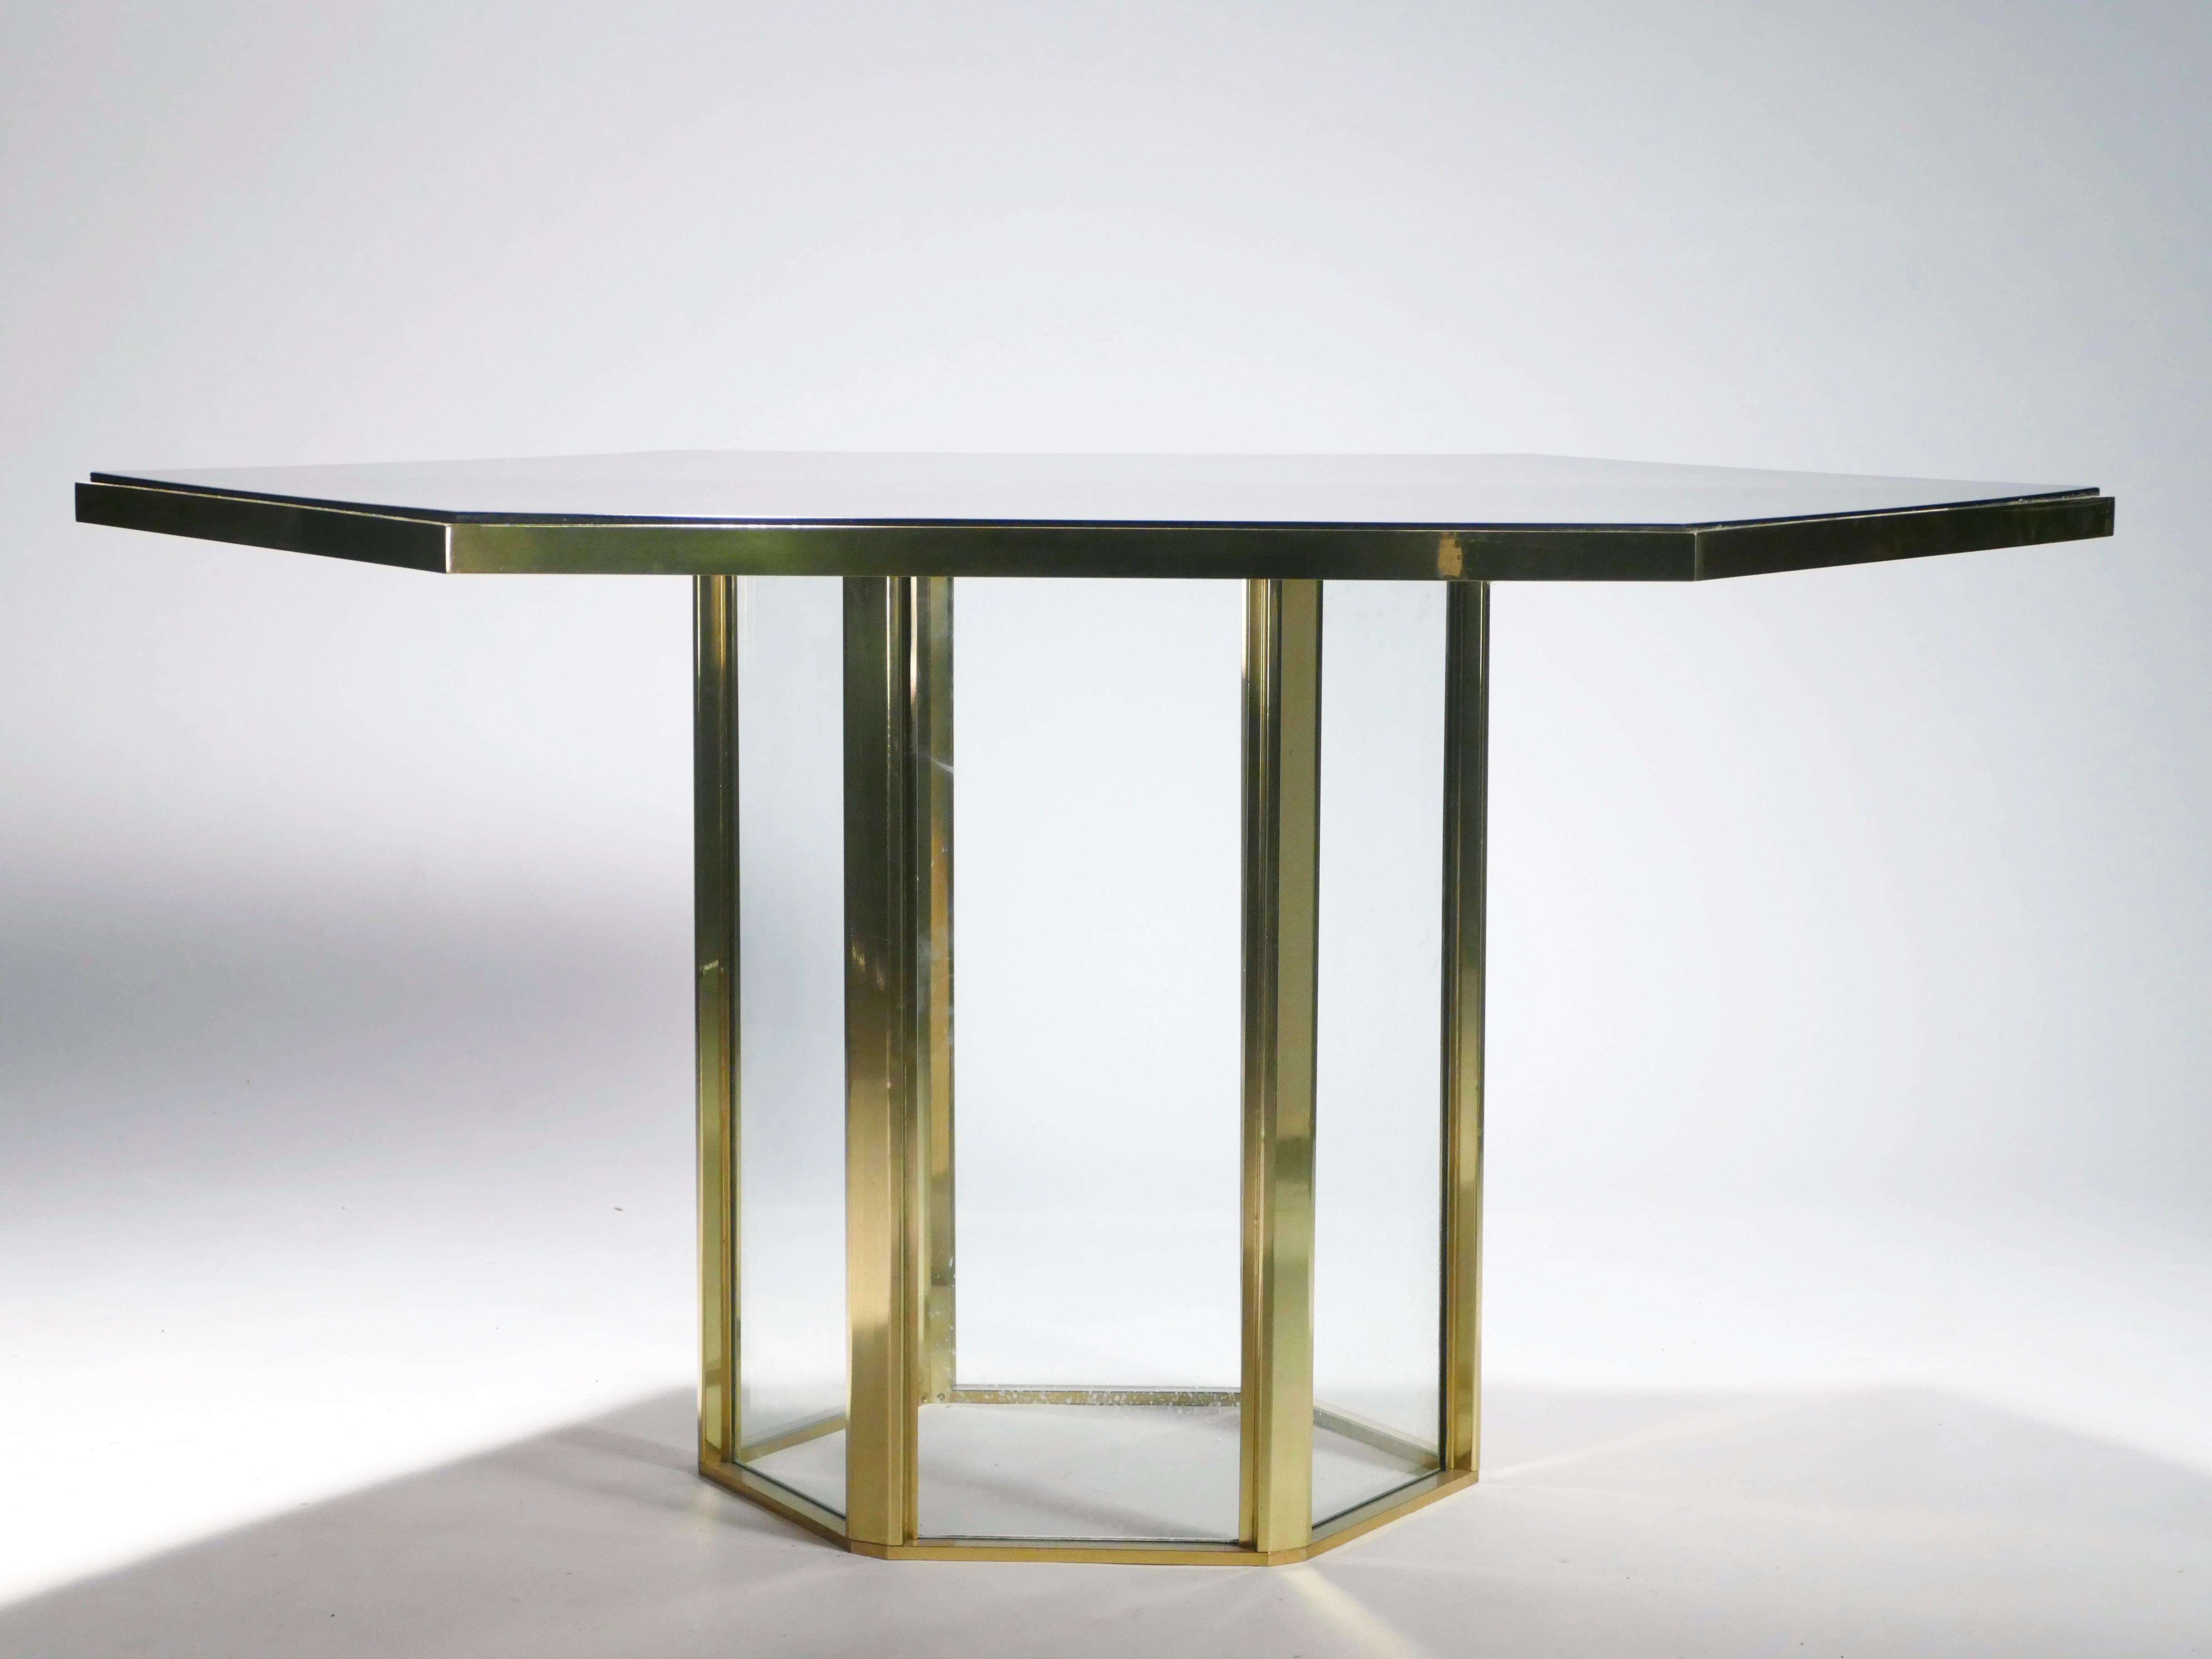 Hollywood Regency Midcentury Romeo Rega Black Lacquer Brass and Glass Dining Table, 1970s